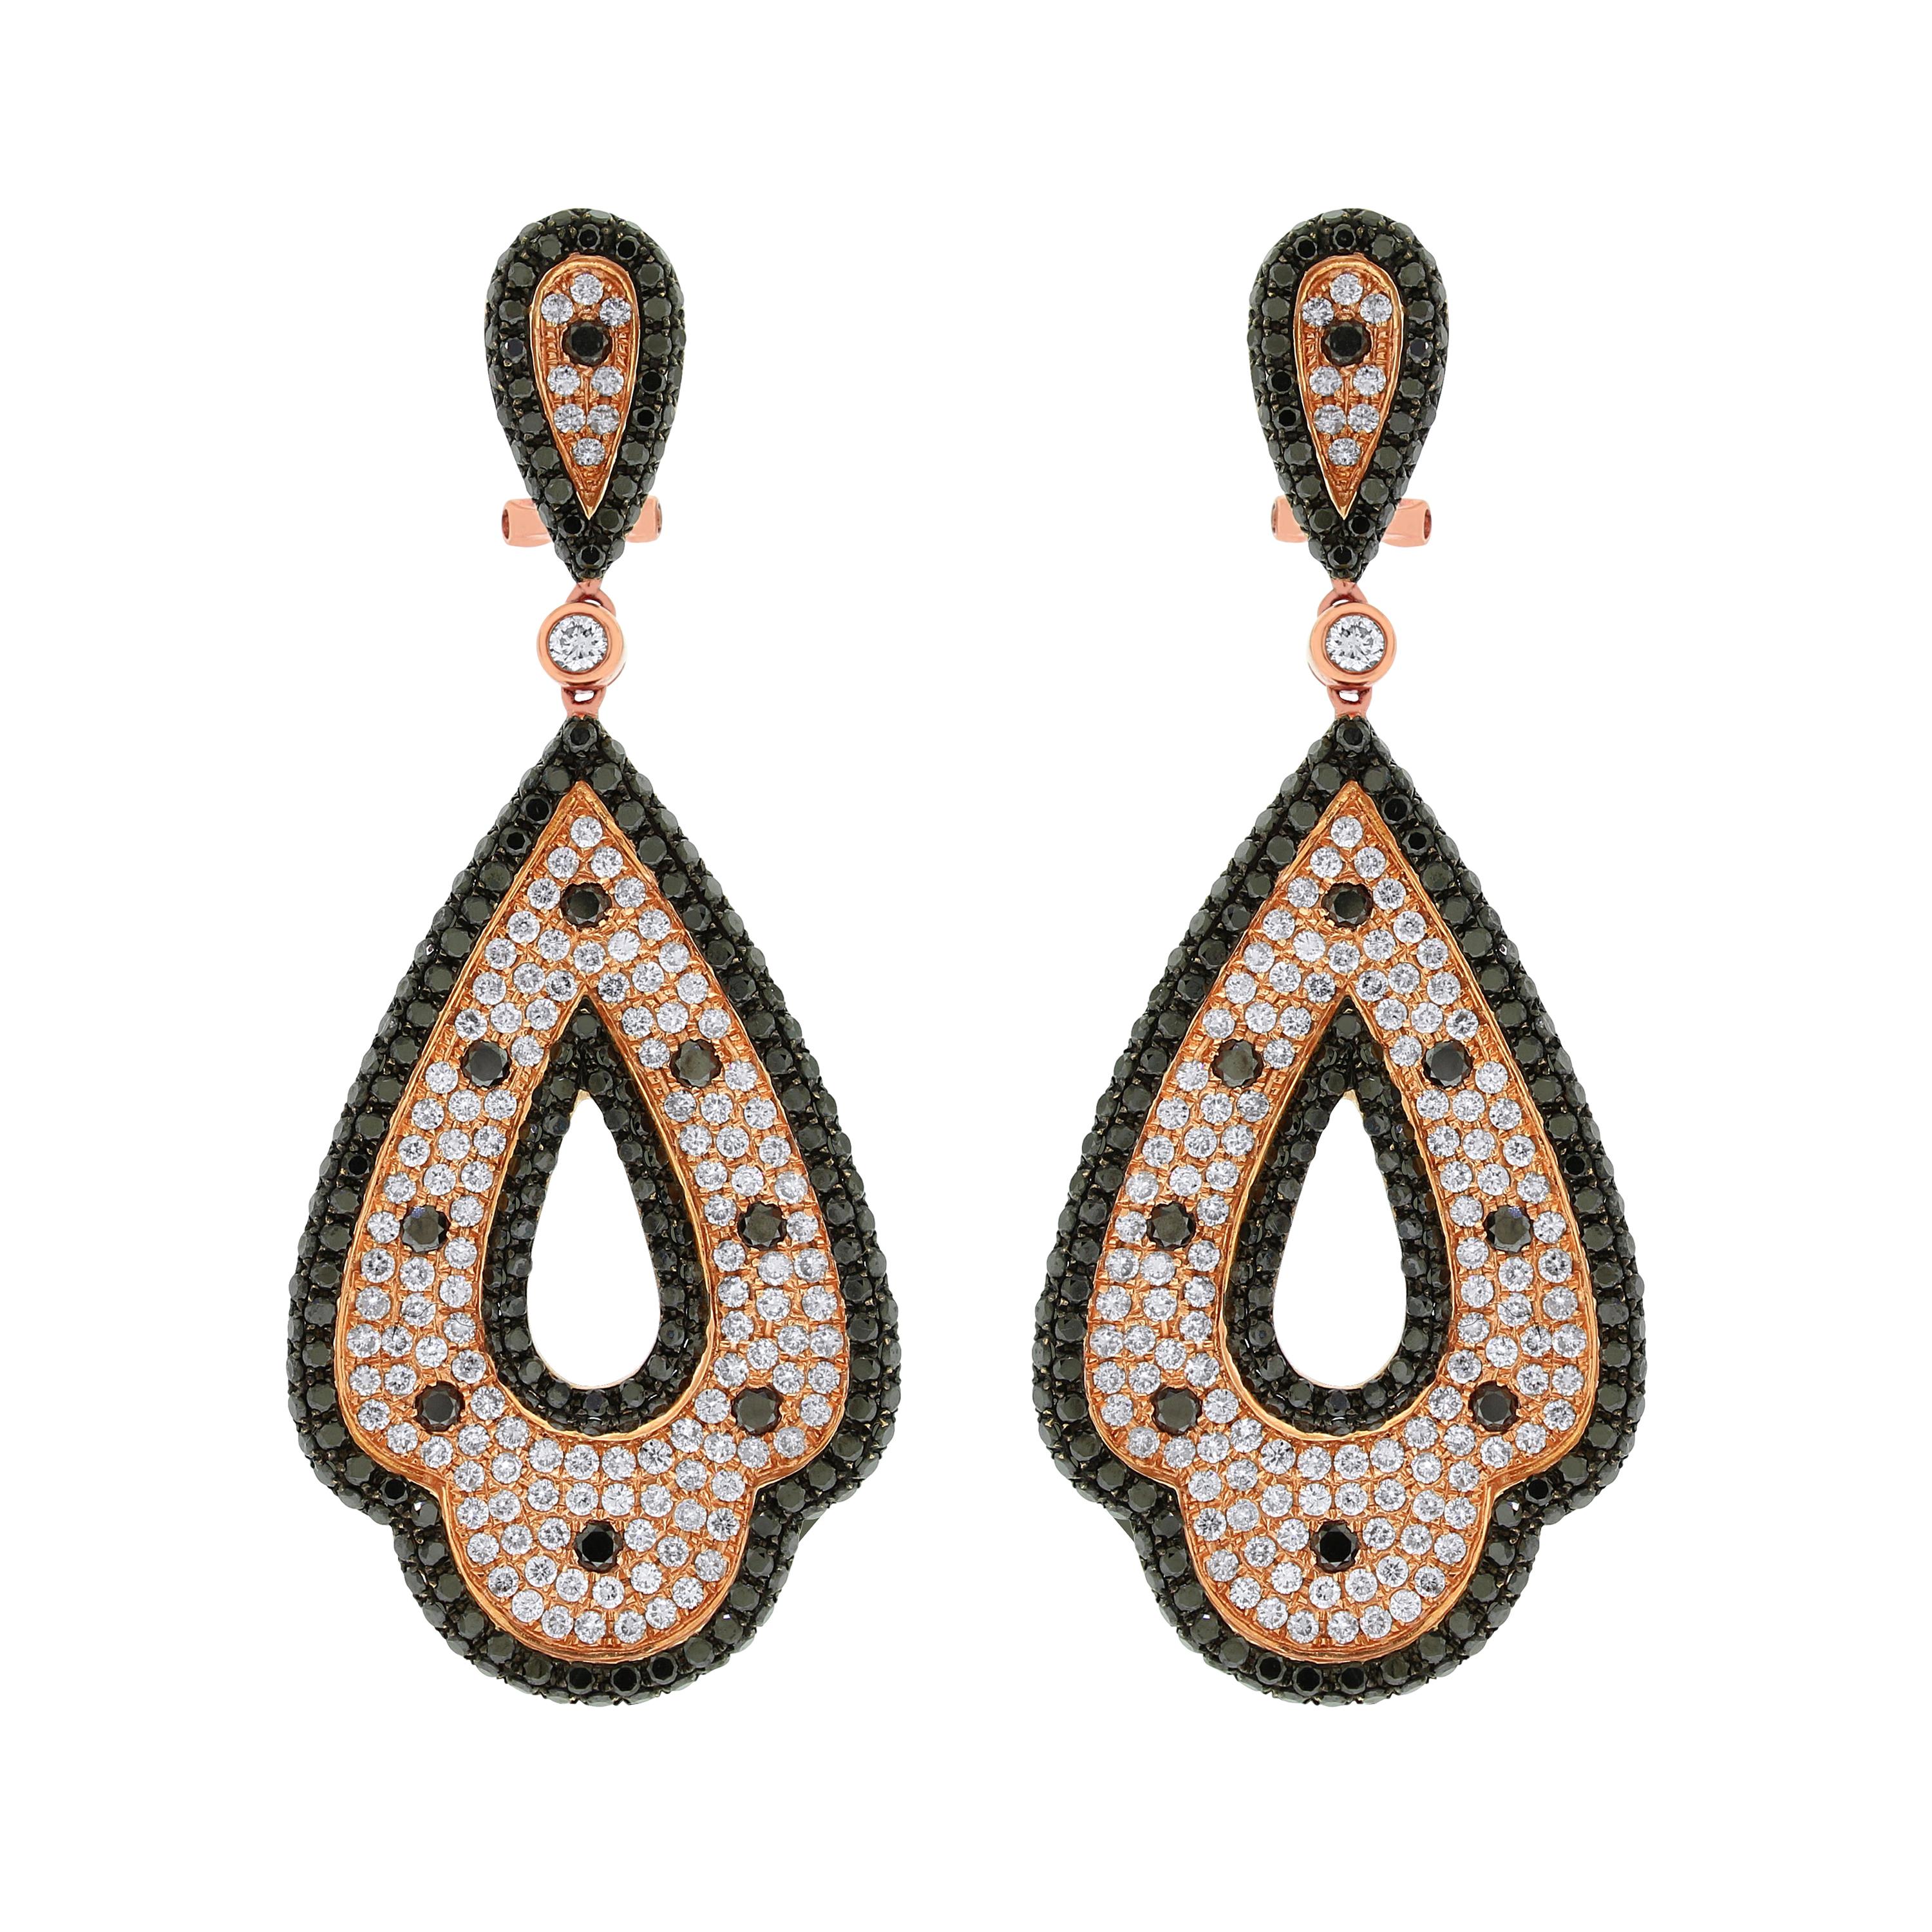 Beauvince Black and White Diamond Large Dangle Earrings in Rose Gold